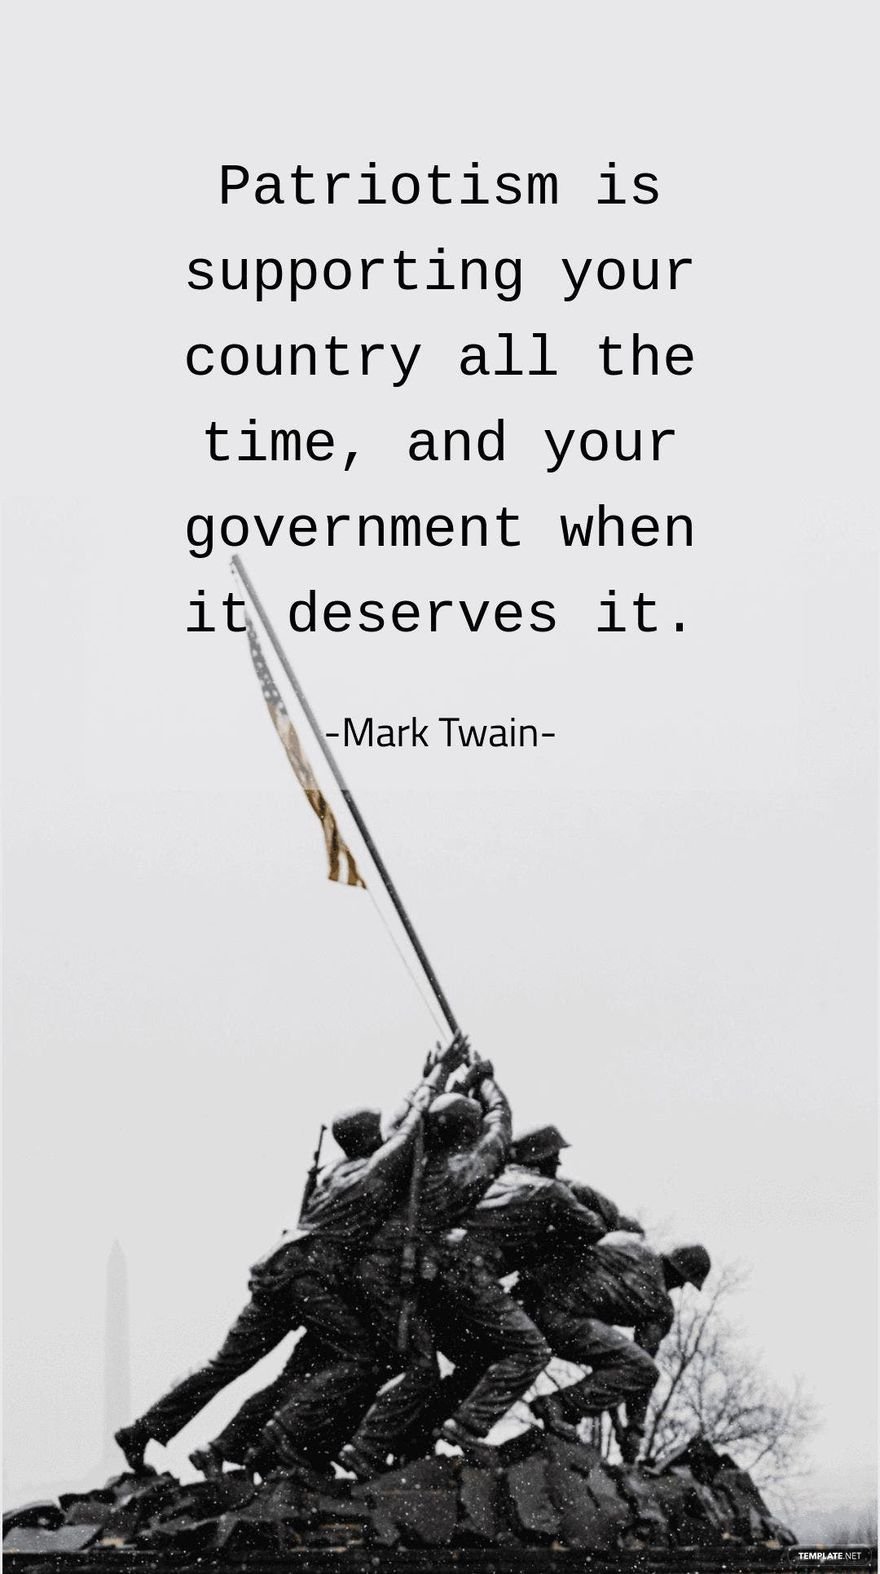 Mark Twain - Patriotism is supporting your country all the time, and your government when it deserves it. in JPG